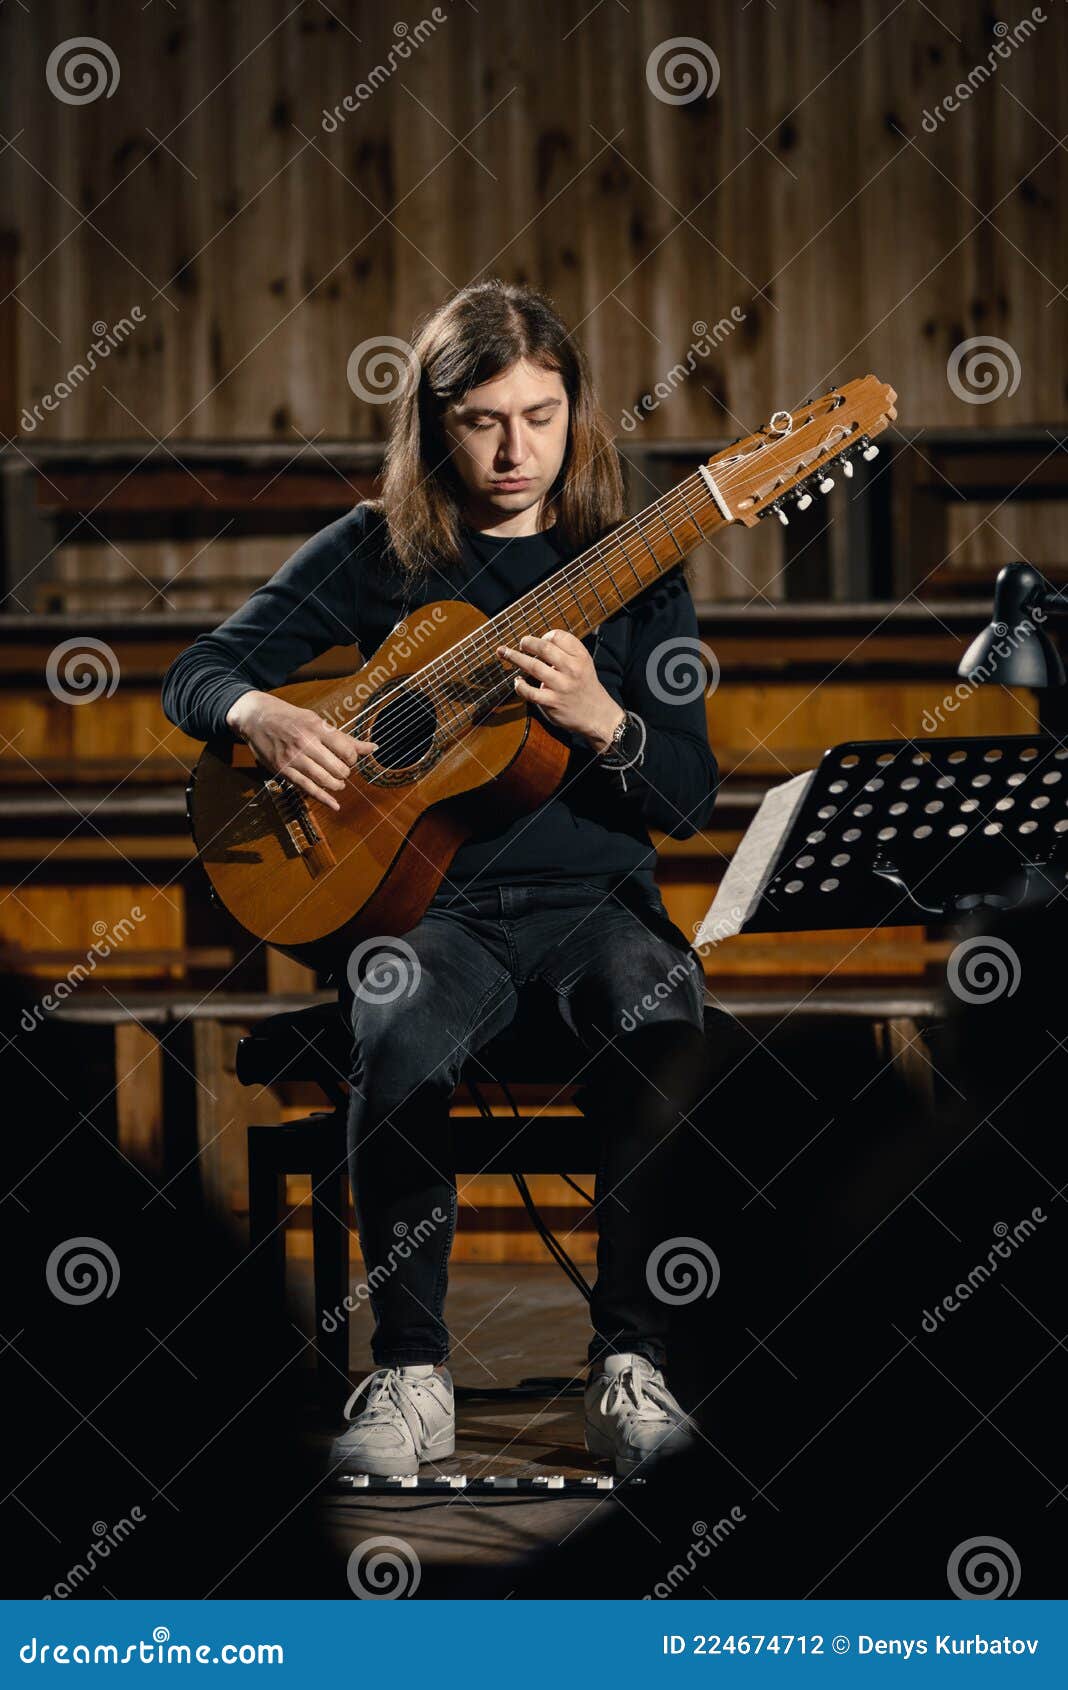 male guitarist on stage